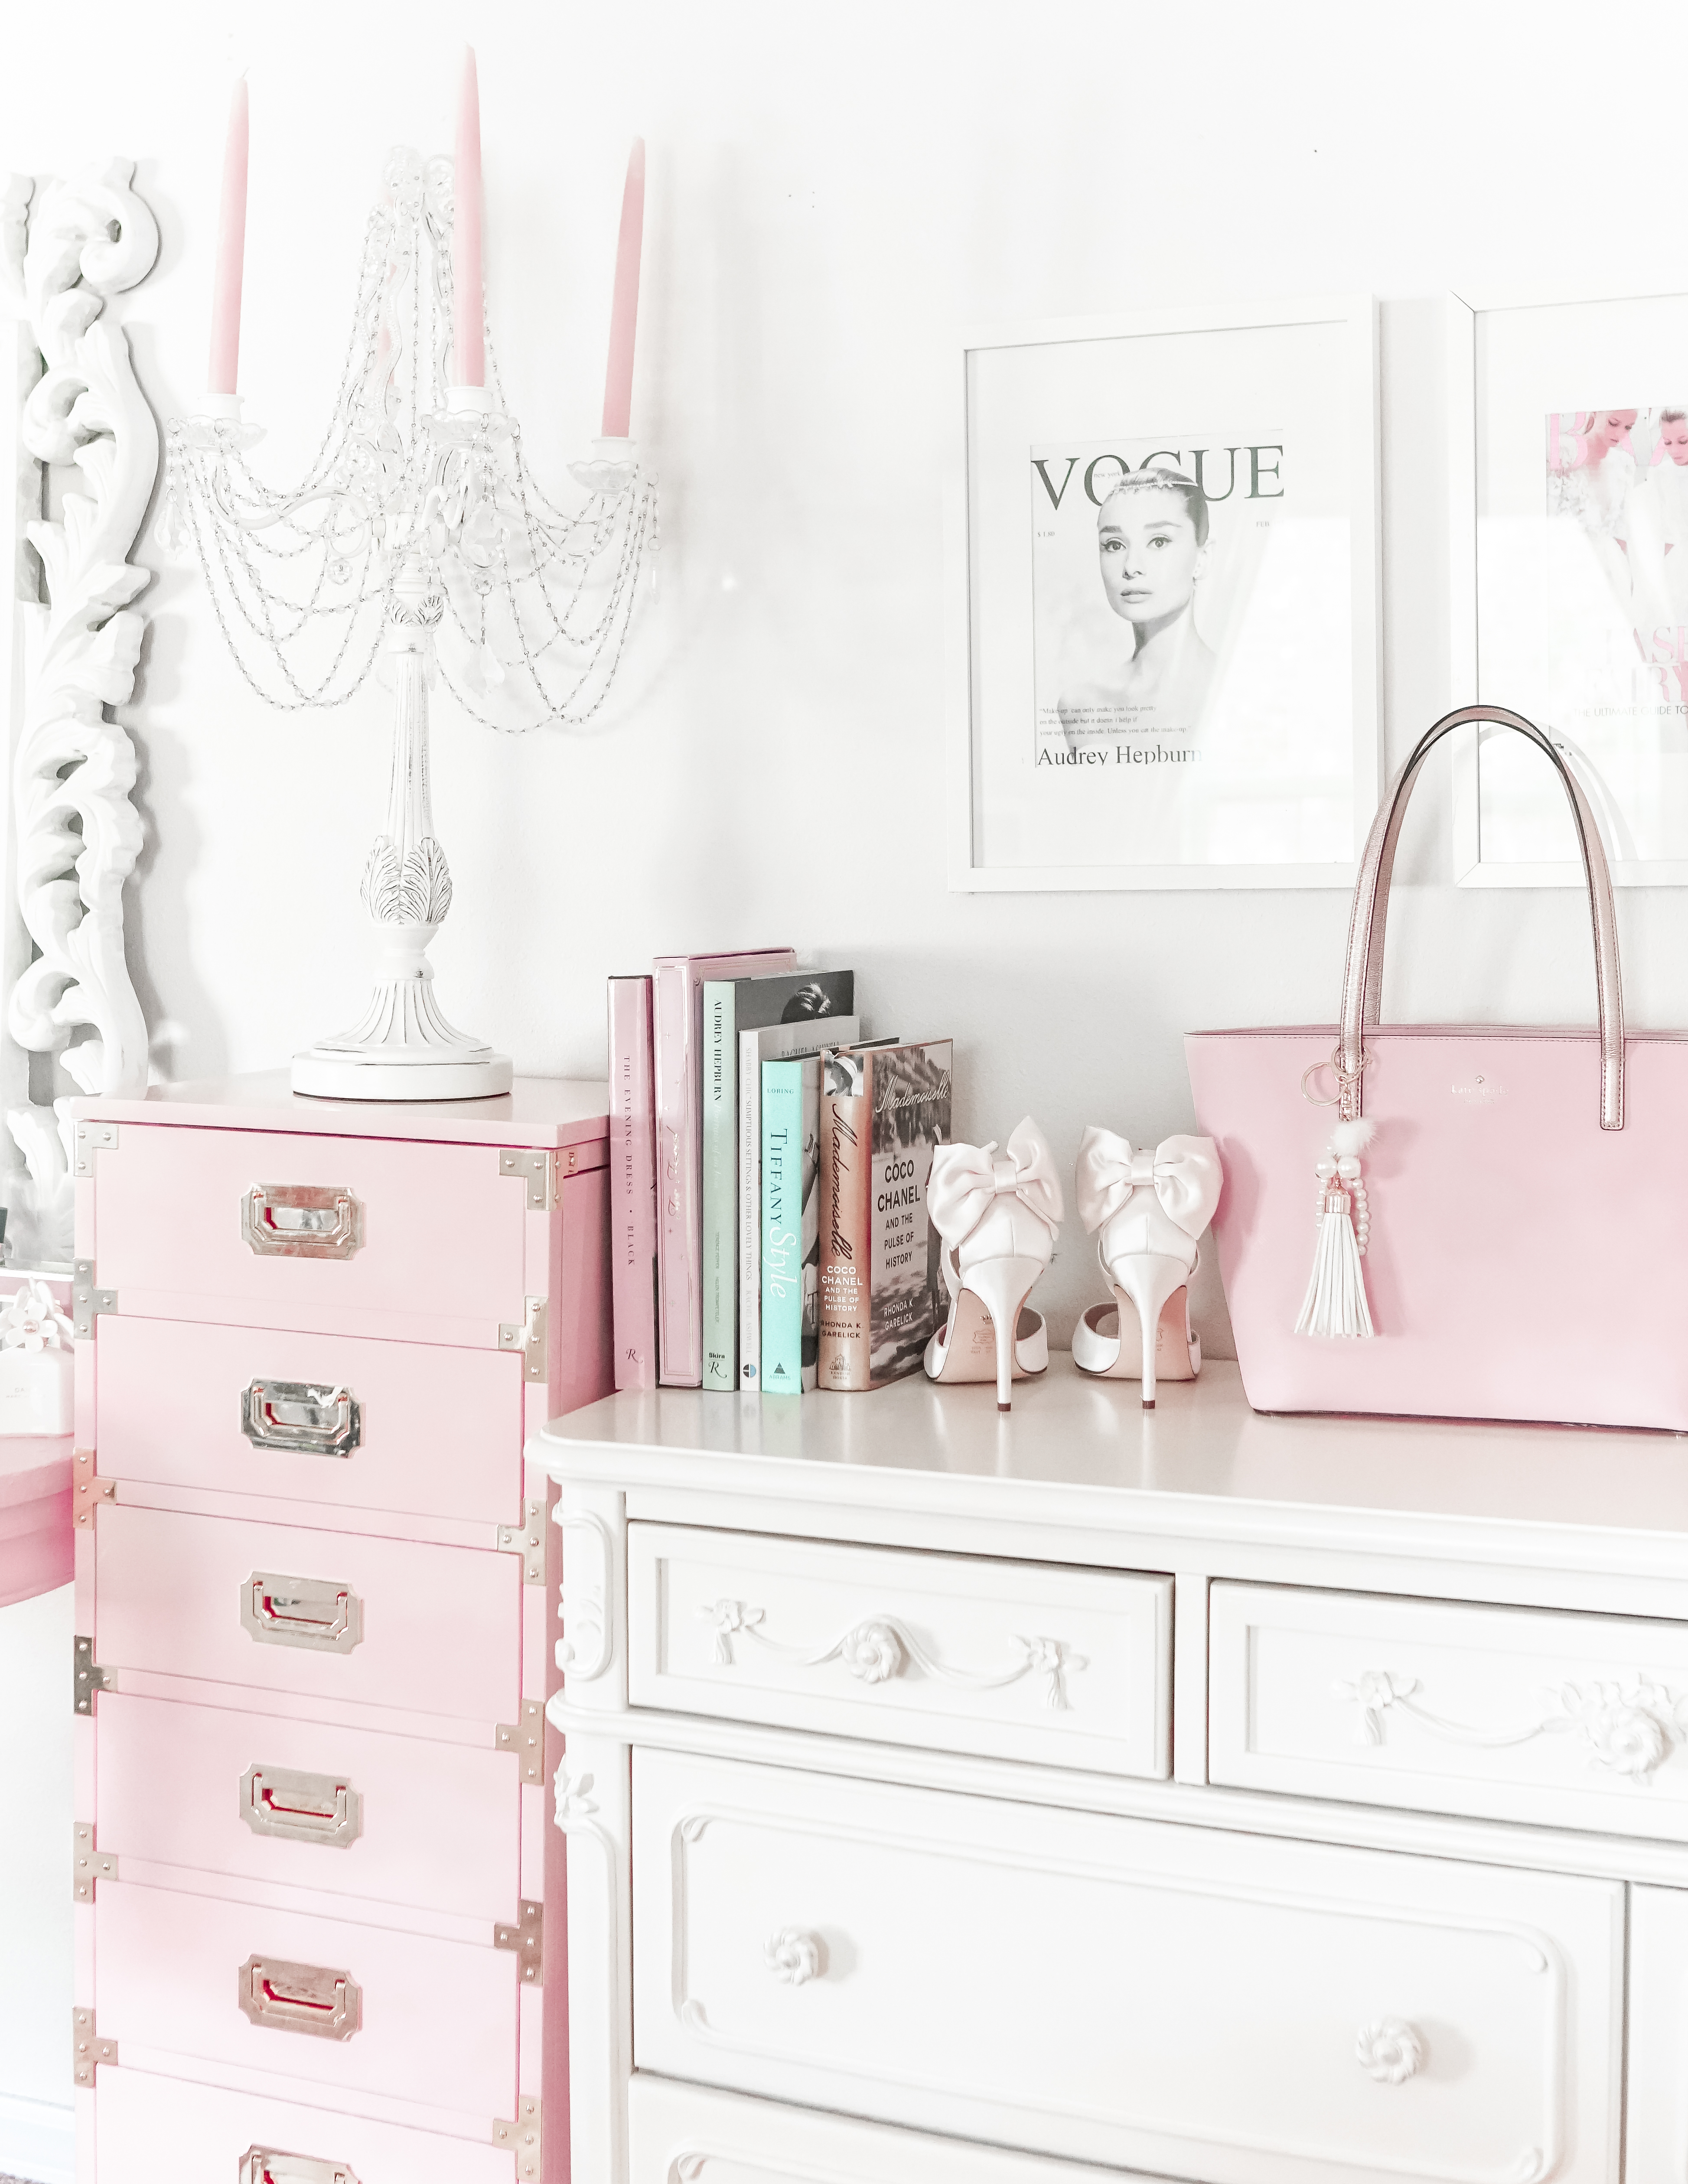 How To Make Your Workspace Pretty & Girly 